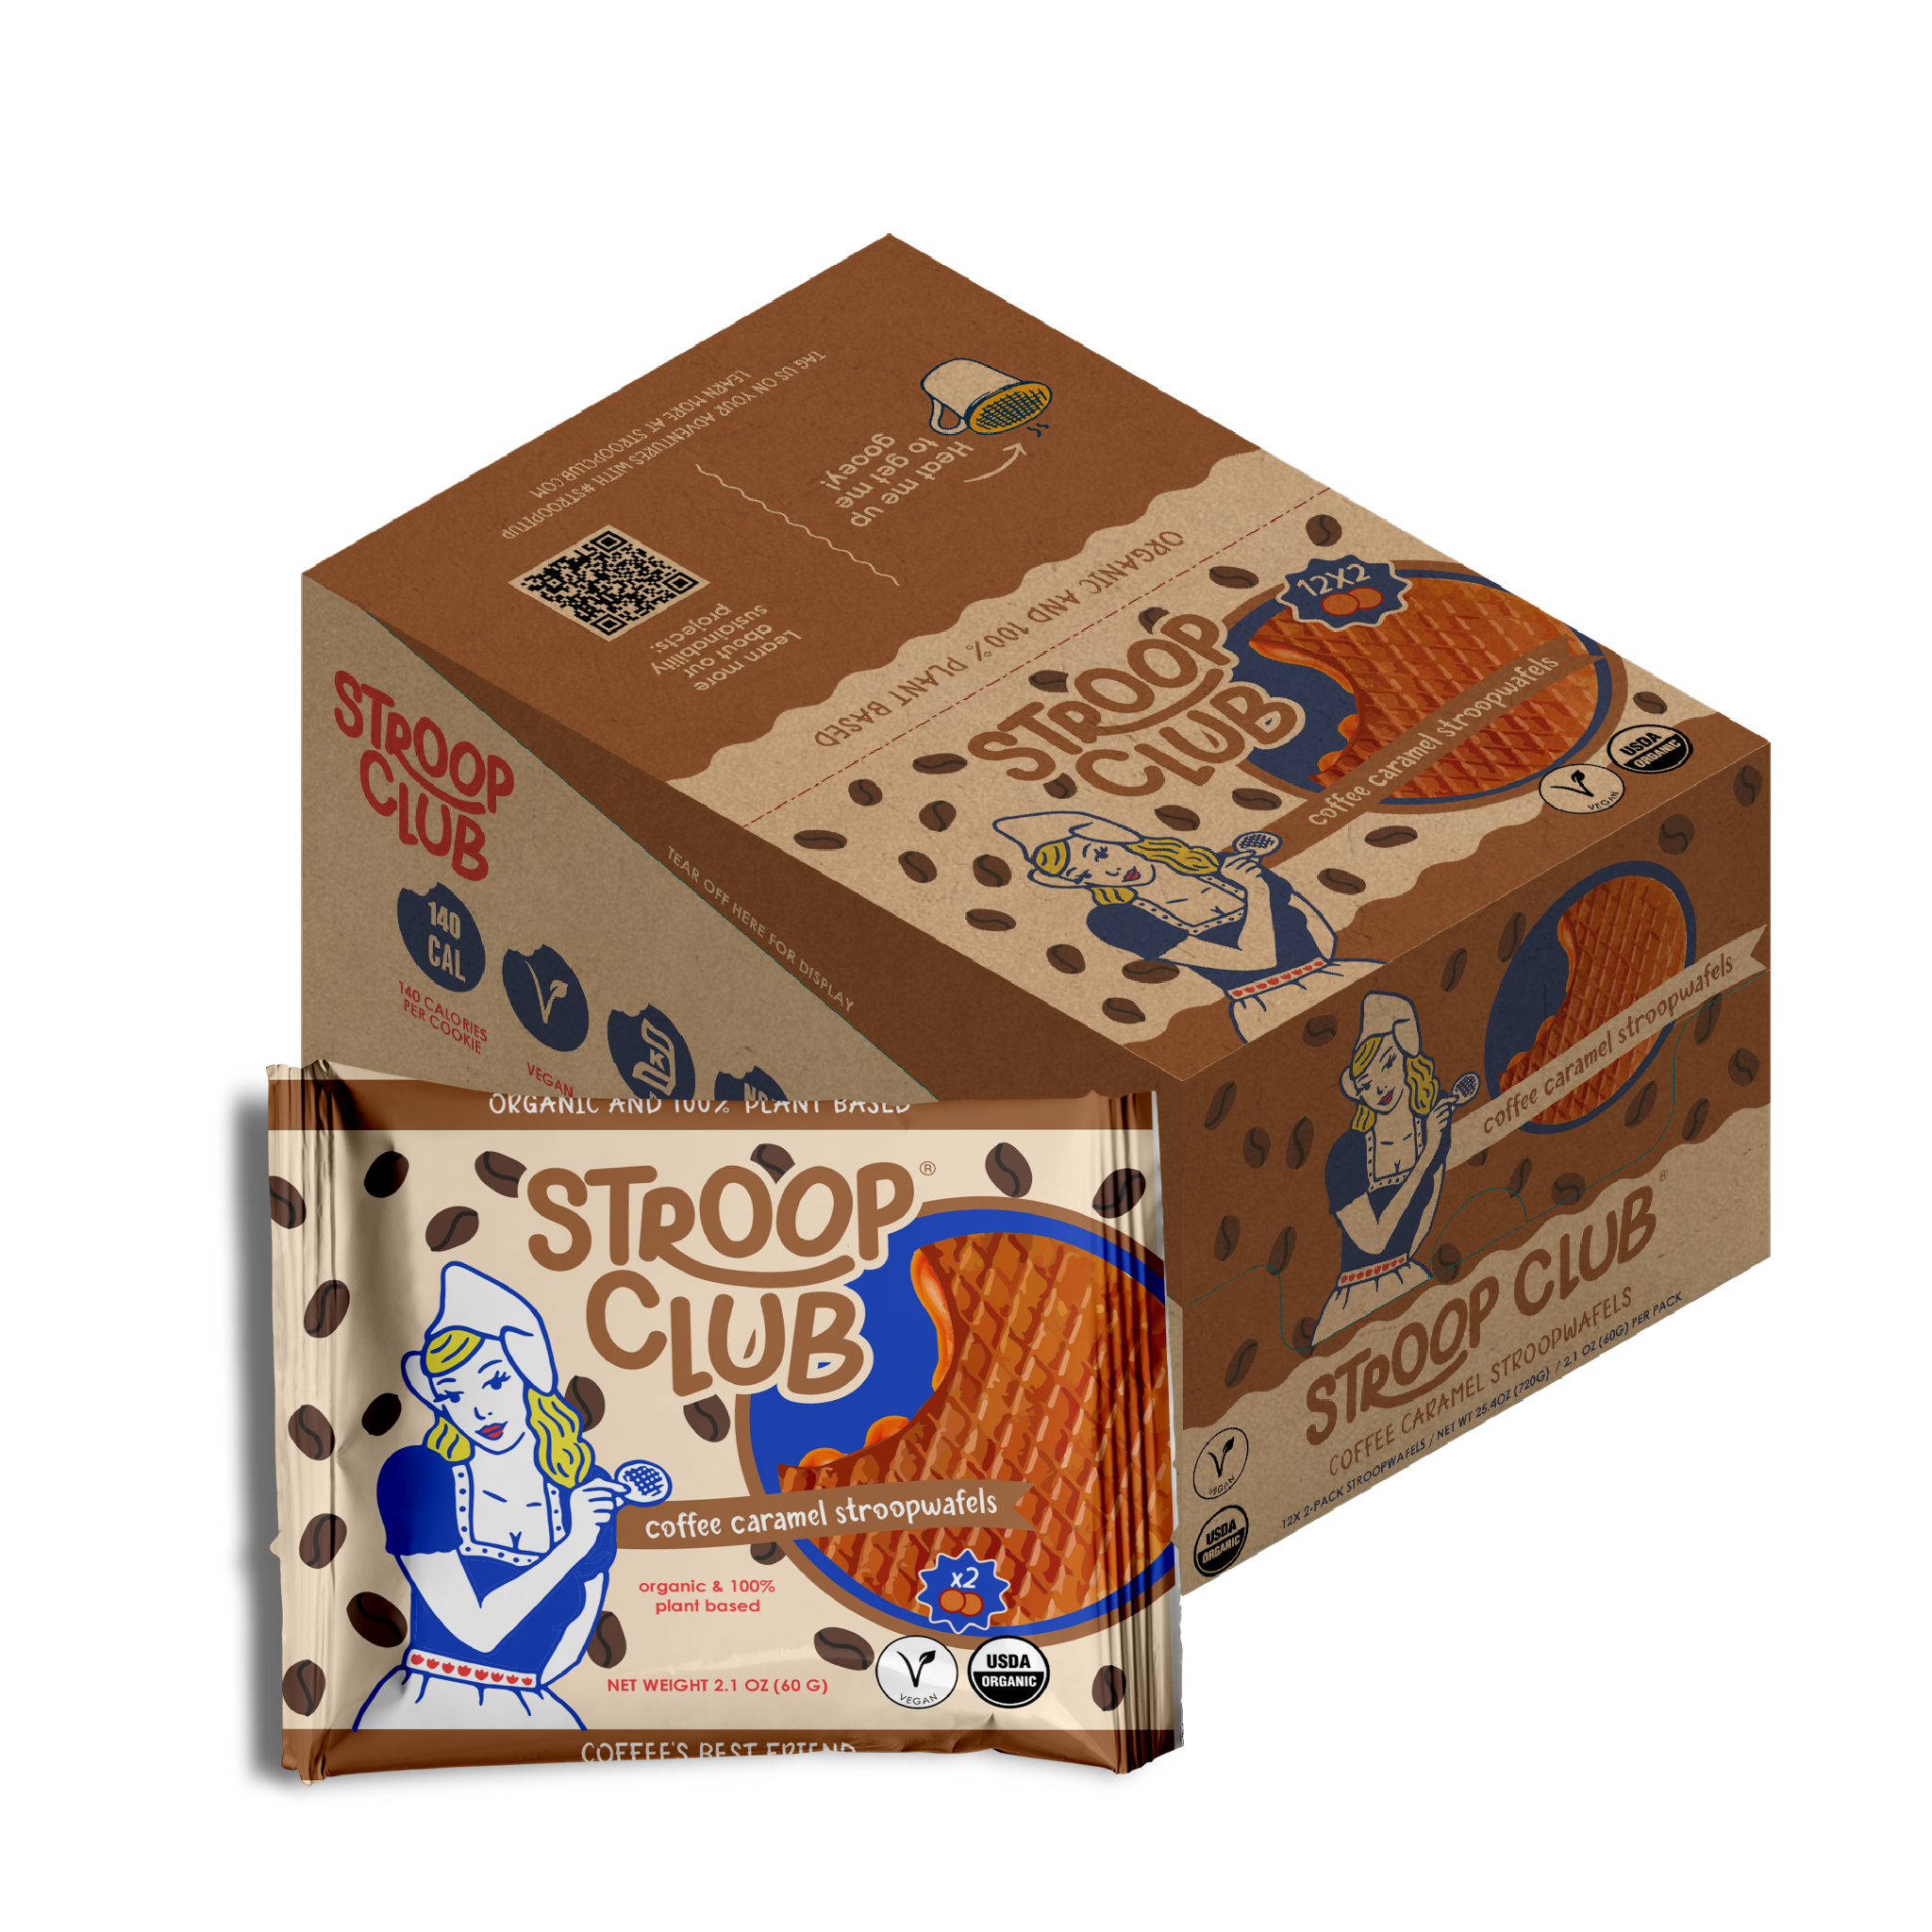 Coffee Caramel Plant Based and Organic Stroopwafels (box of 12x 2-pack - 24 total)